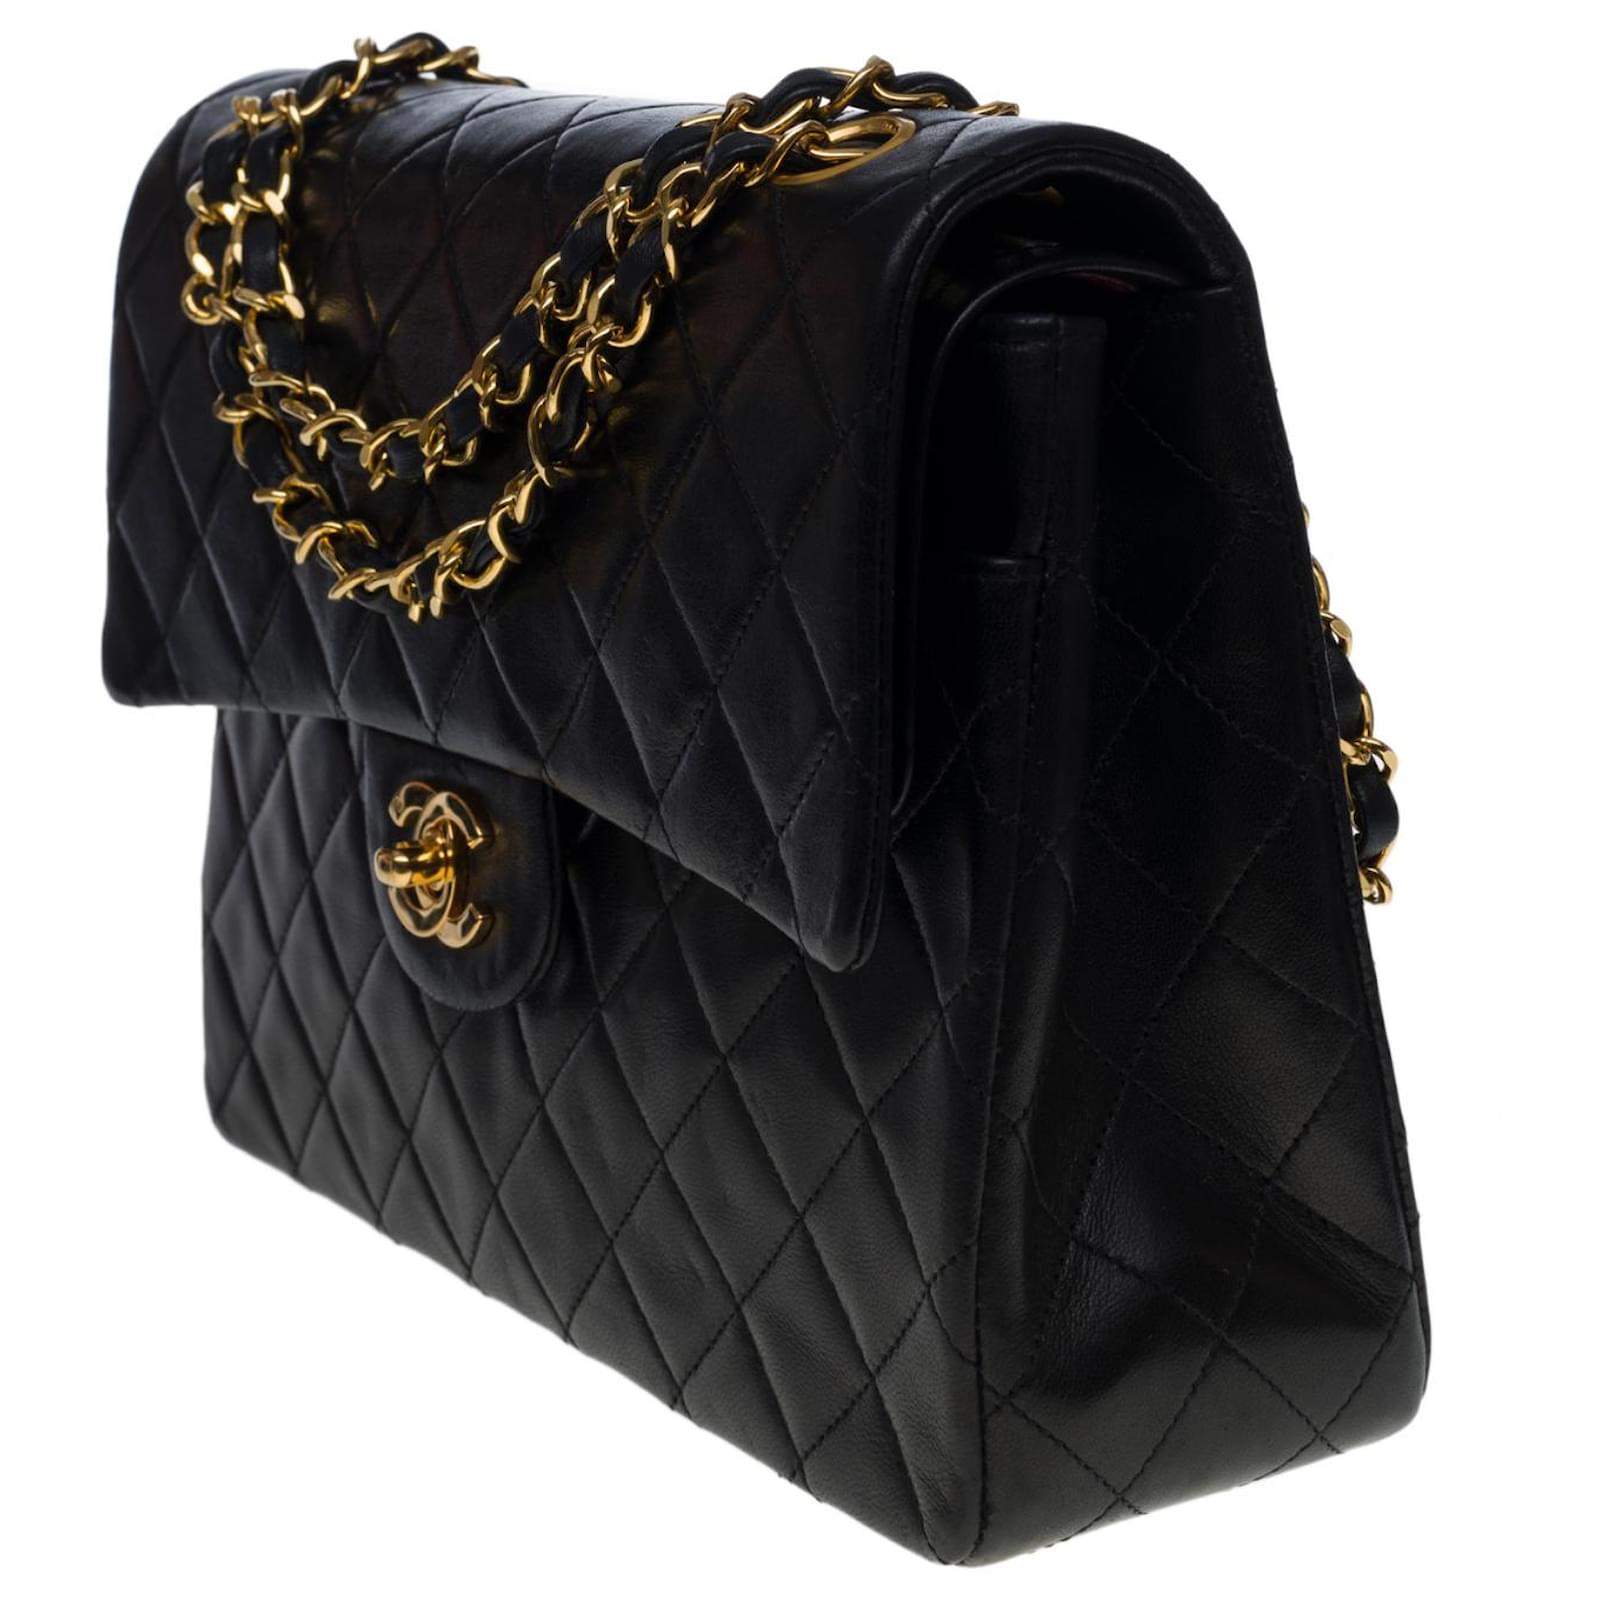 The coveted Chanel Timeless/Classic medium bag 25 cm with lined